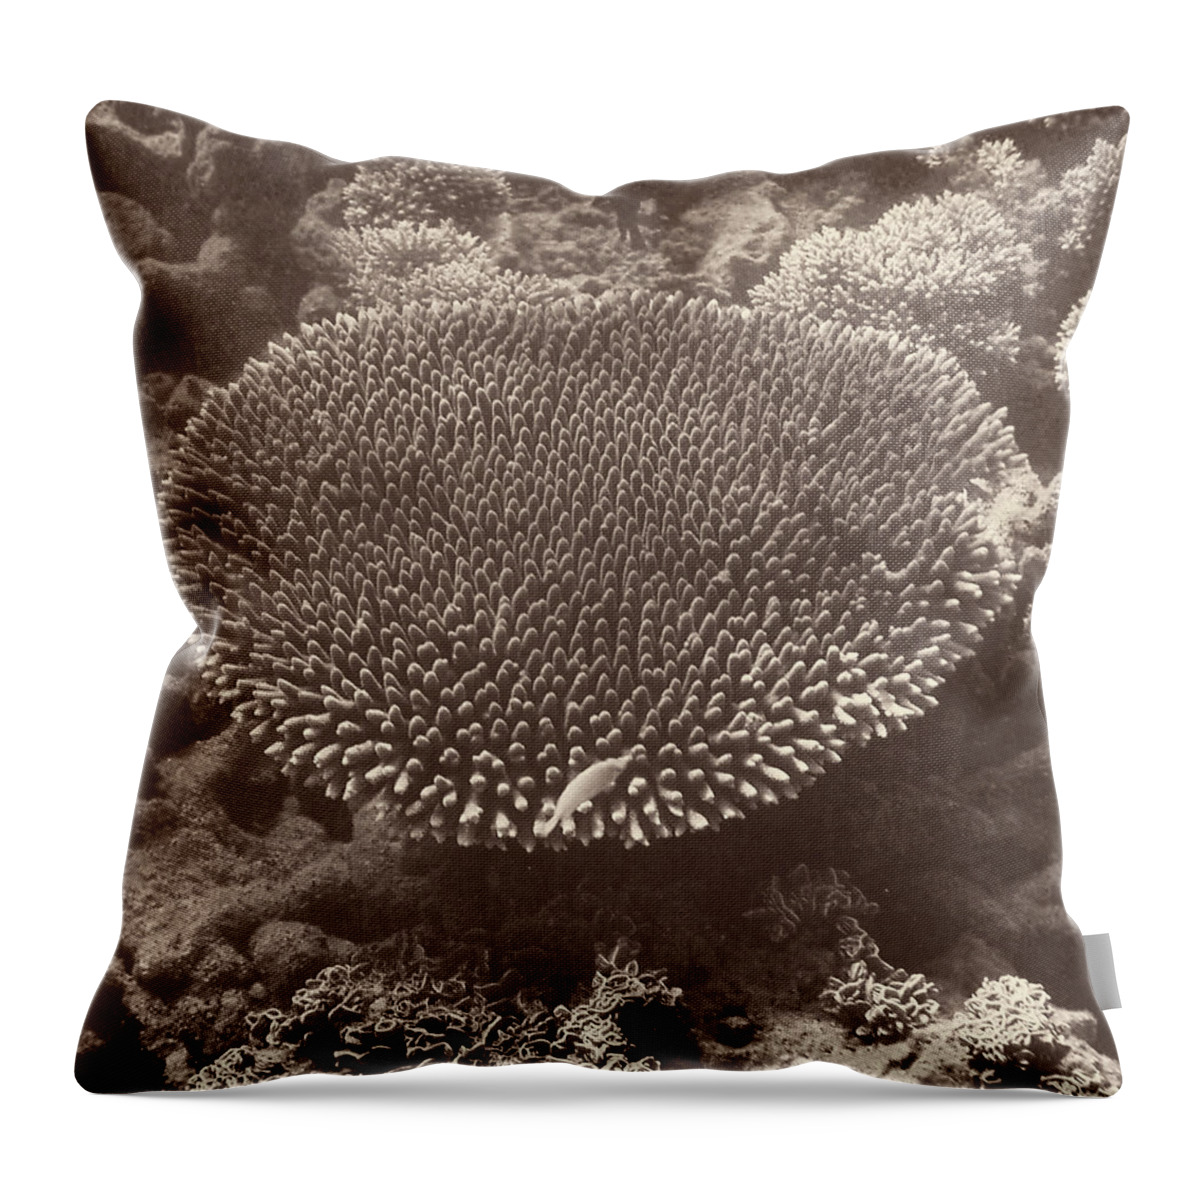 Barrier Throw Pillow featuring the digital art Sepia Barrier Reef Coral II by Kathy Mansfield